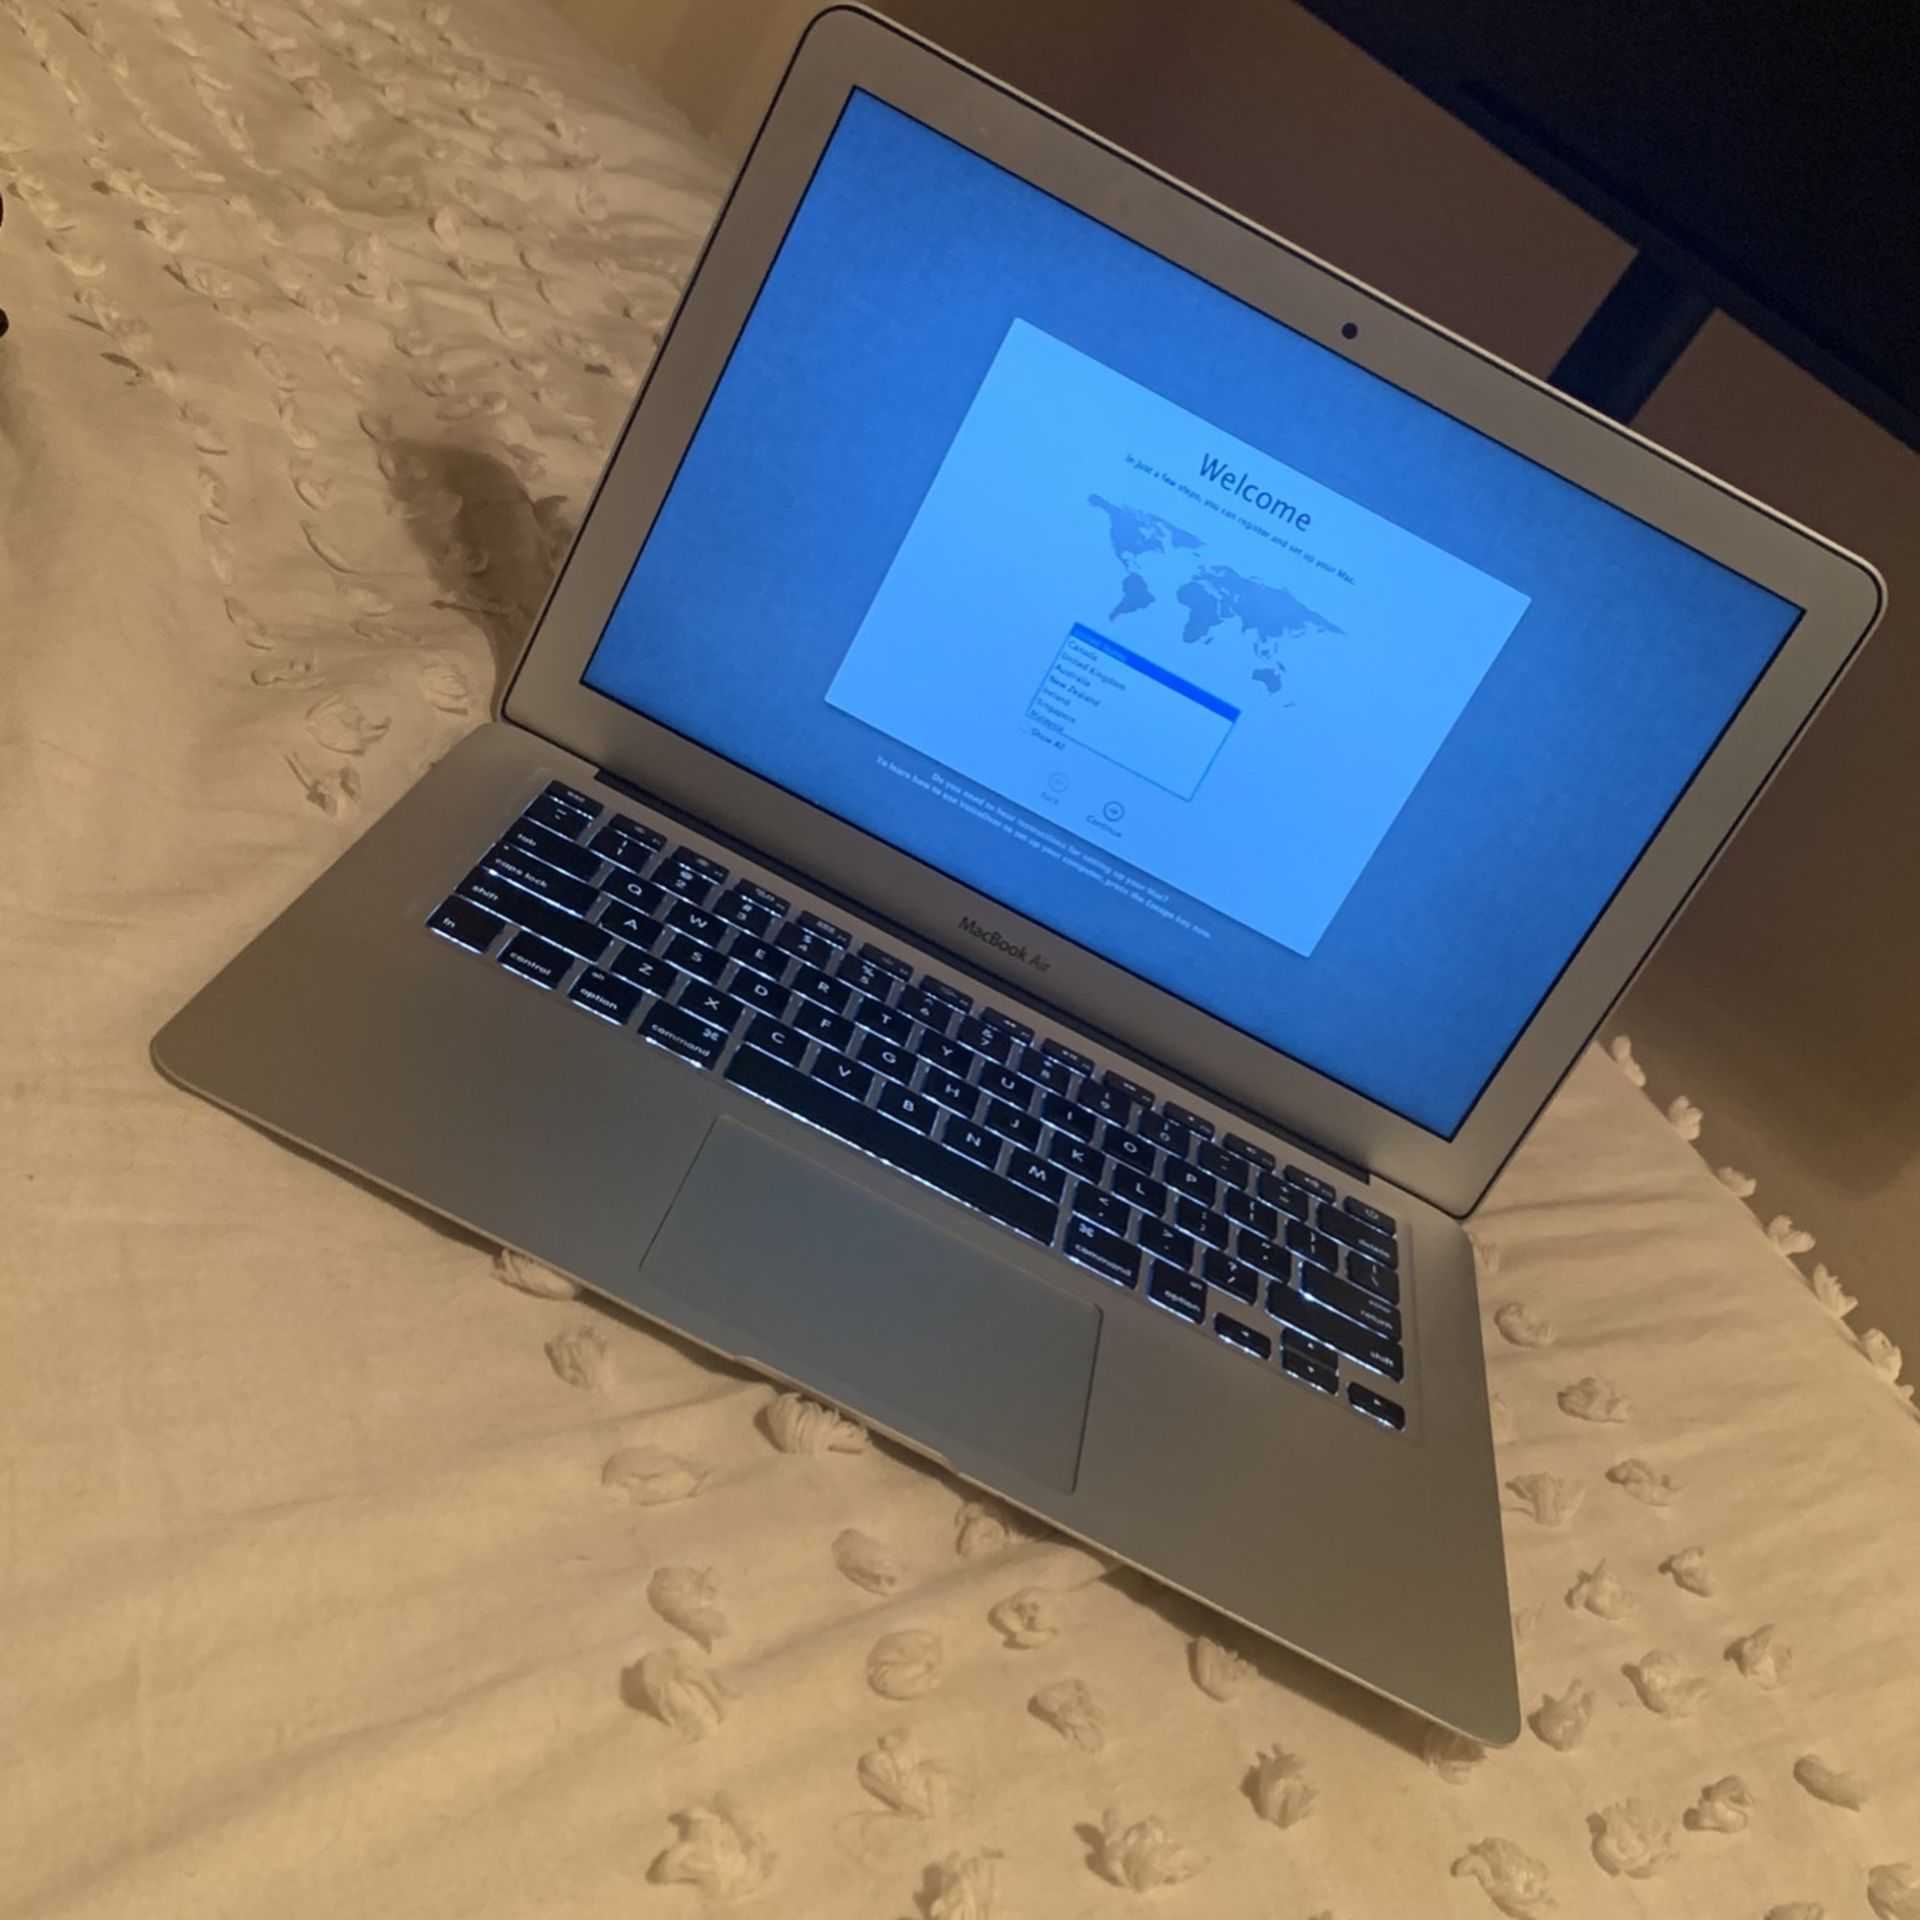 macbook air (mid 2012), best condition possible